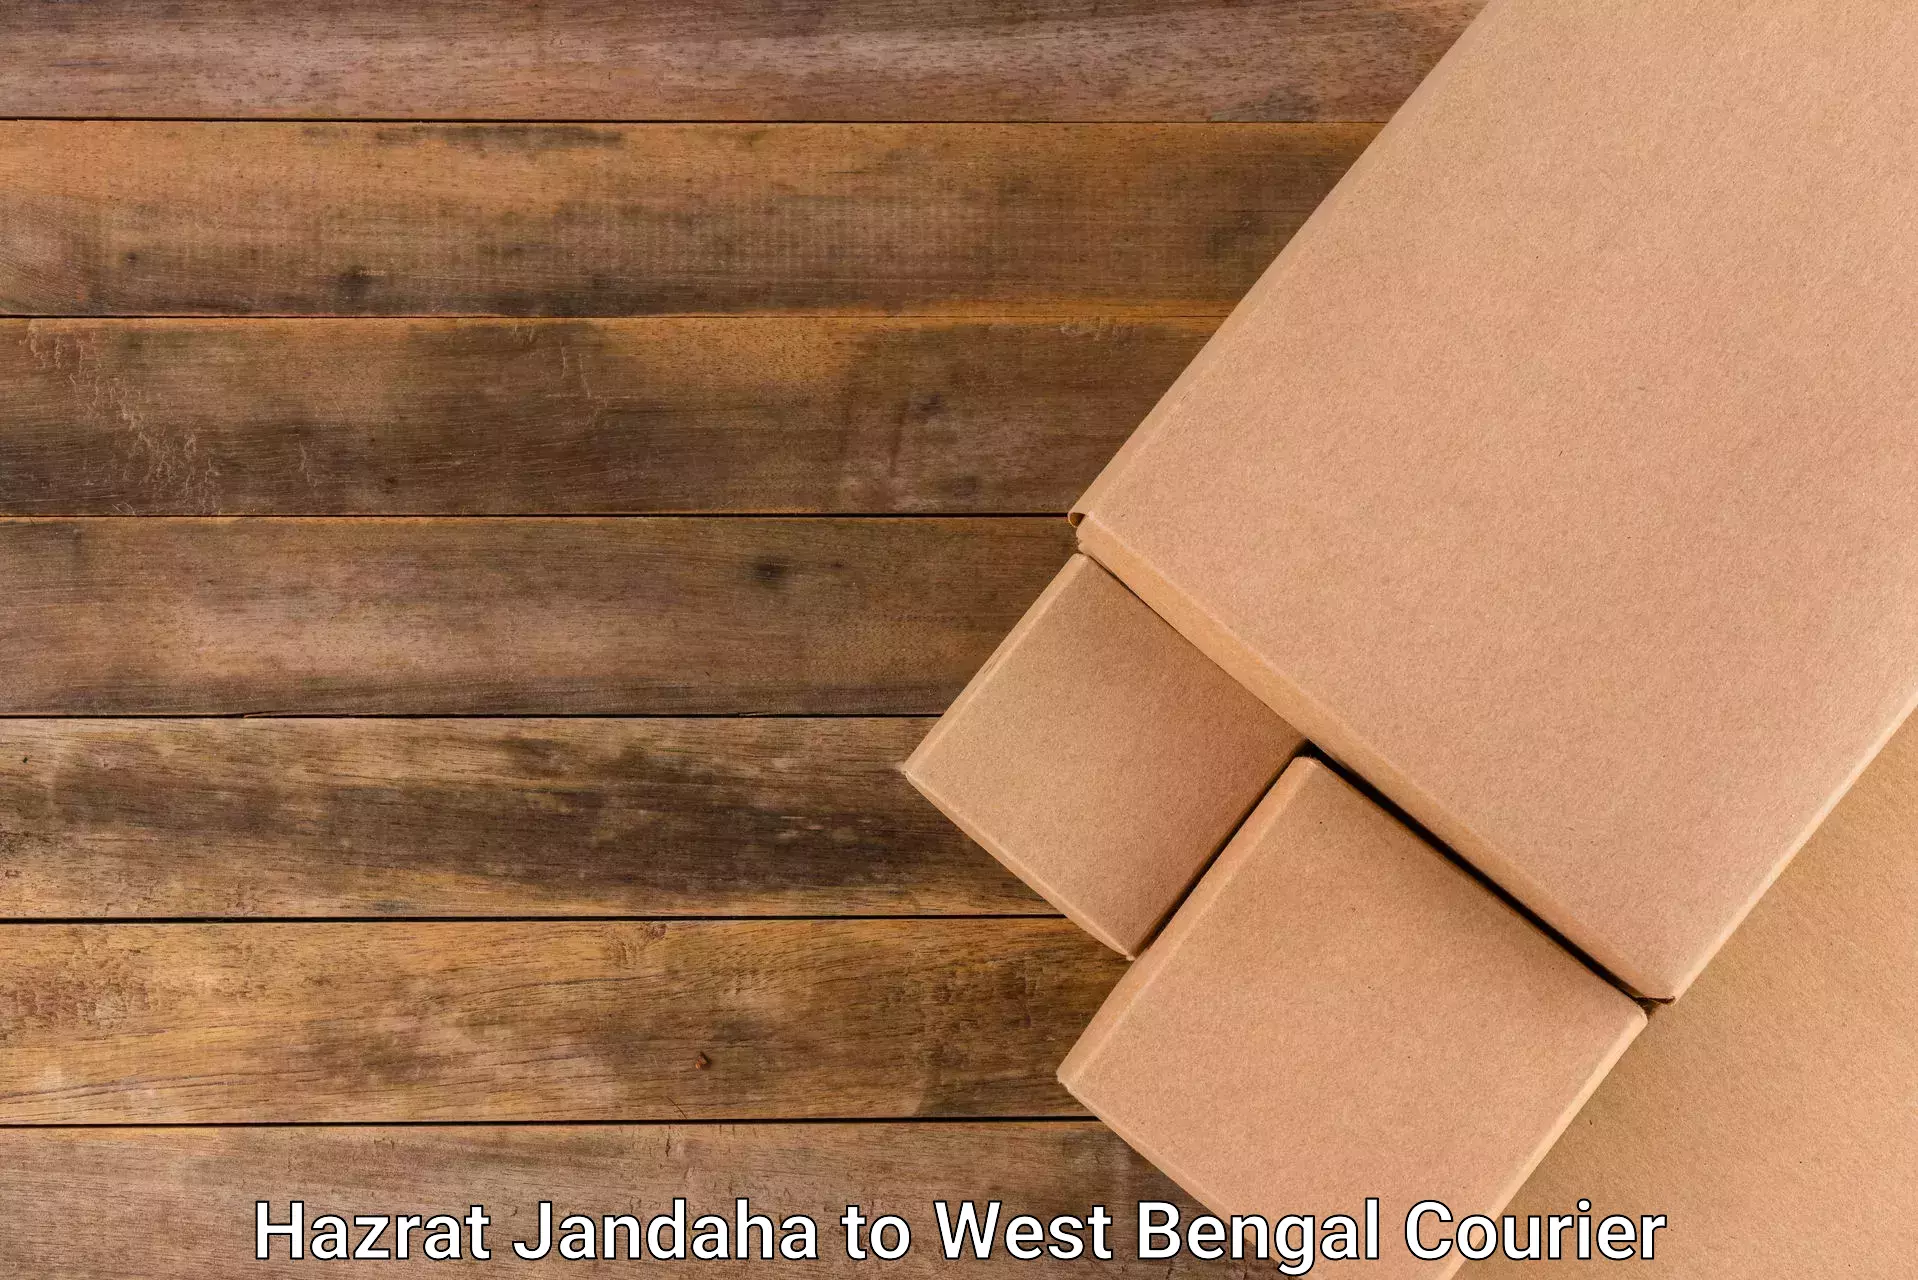 Courier service booking Hazrat Jandaha to West Bengal